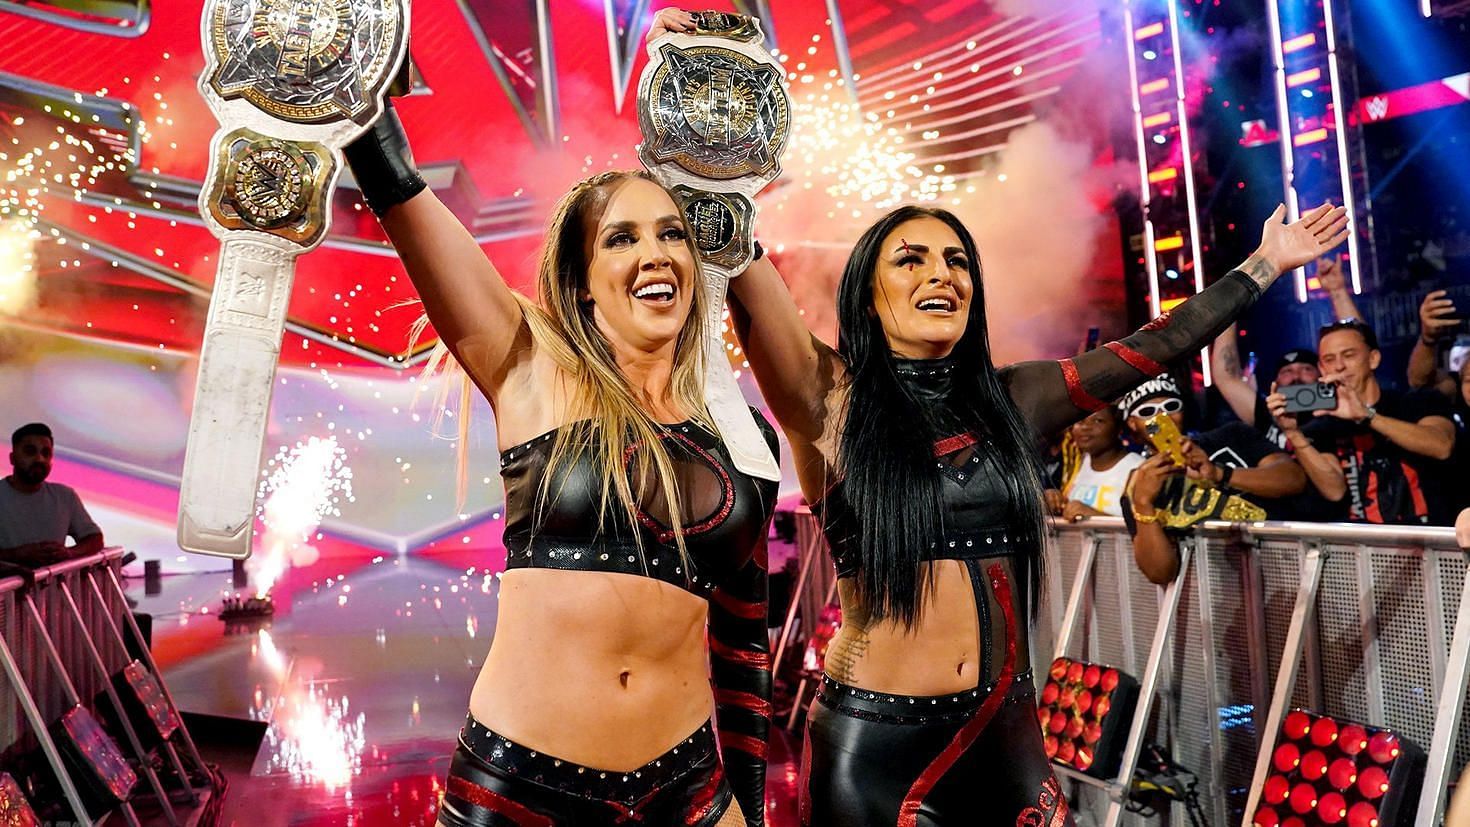 Chelsea Green and Sonya Deville are the new Women